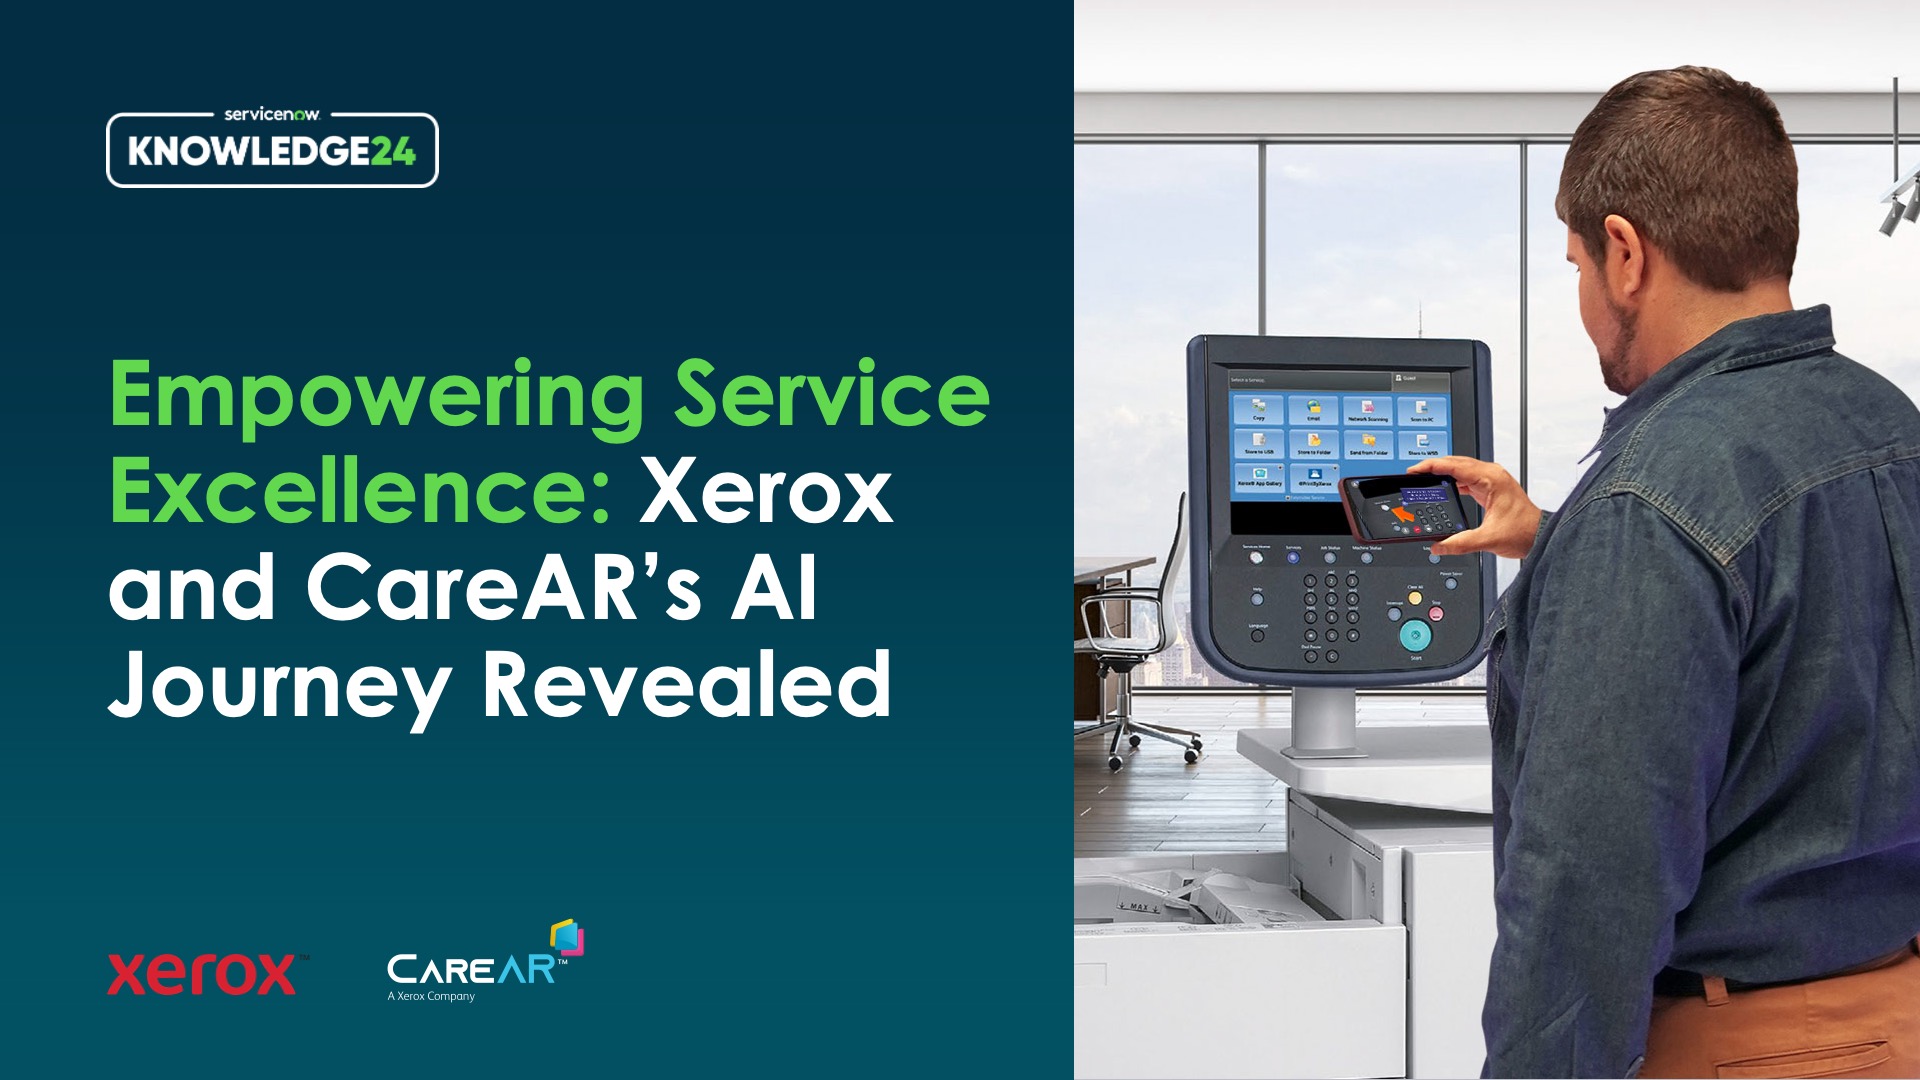 Empowering Service Excellence: Xerox and CareAR's AI Journey Revealed